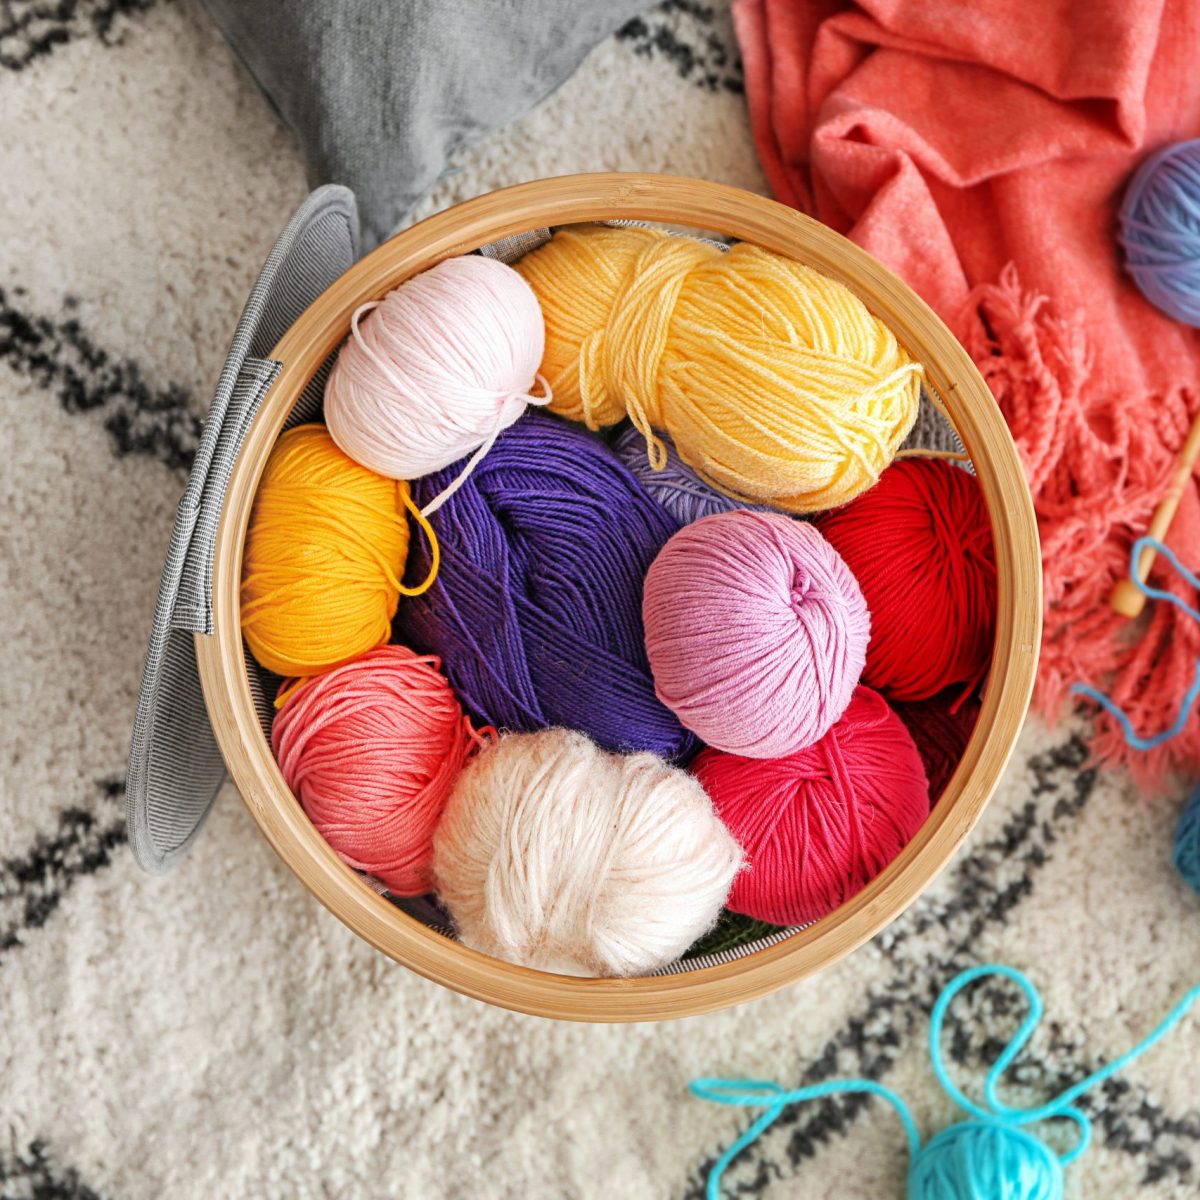 Storage ideas for knitting needles, how do you store yours?